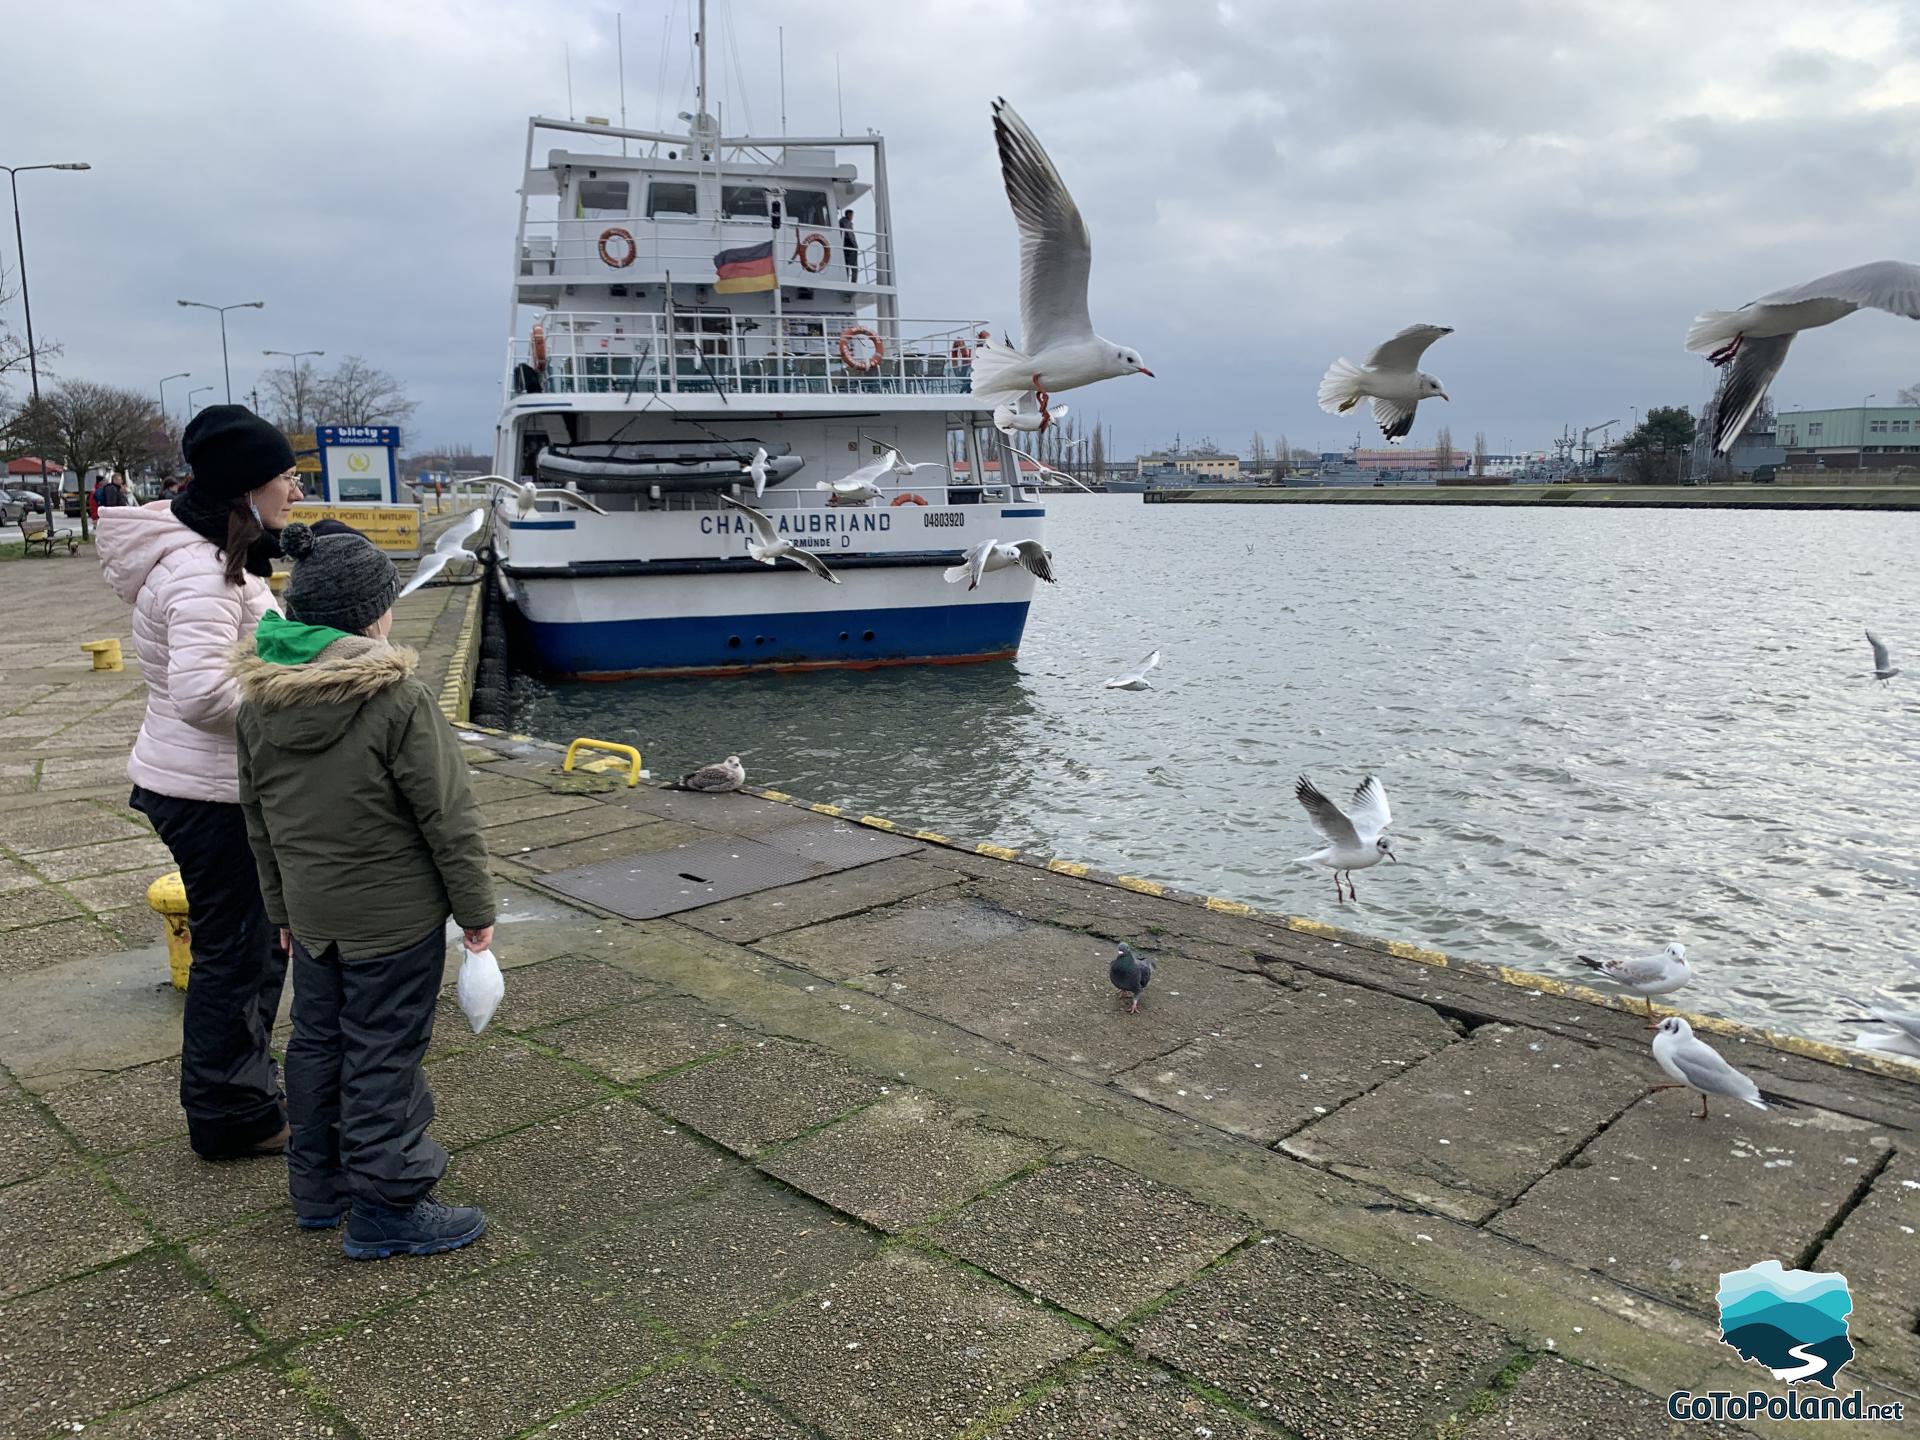 a woman and two boys are on the river bank, seagulls are flying, the ship is moored